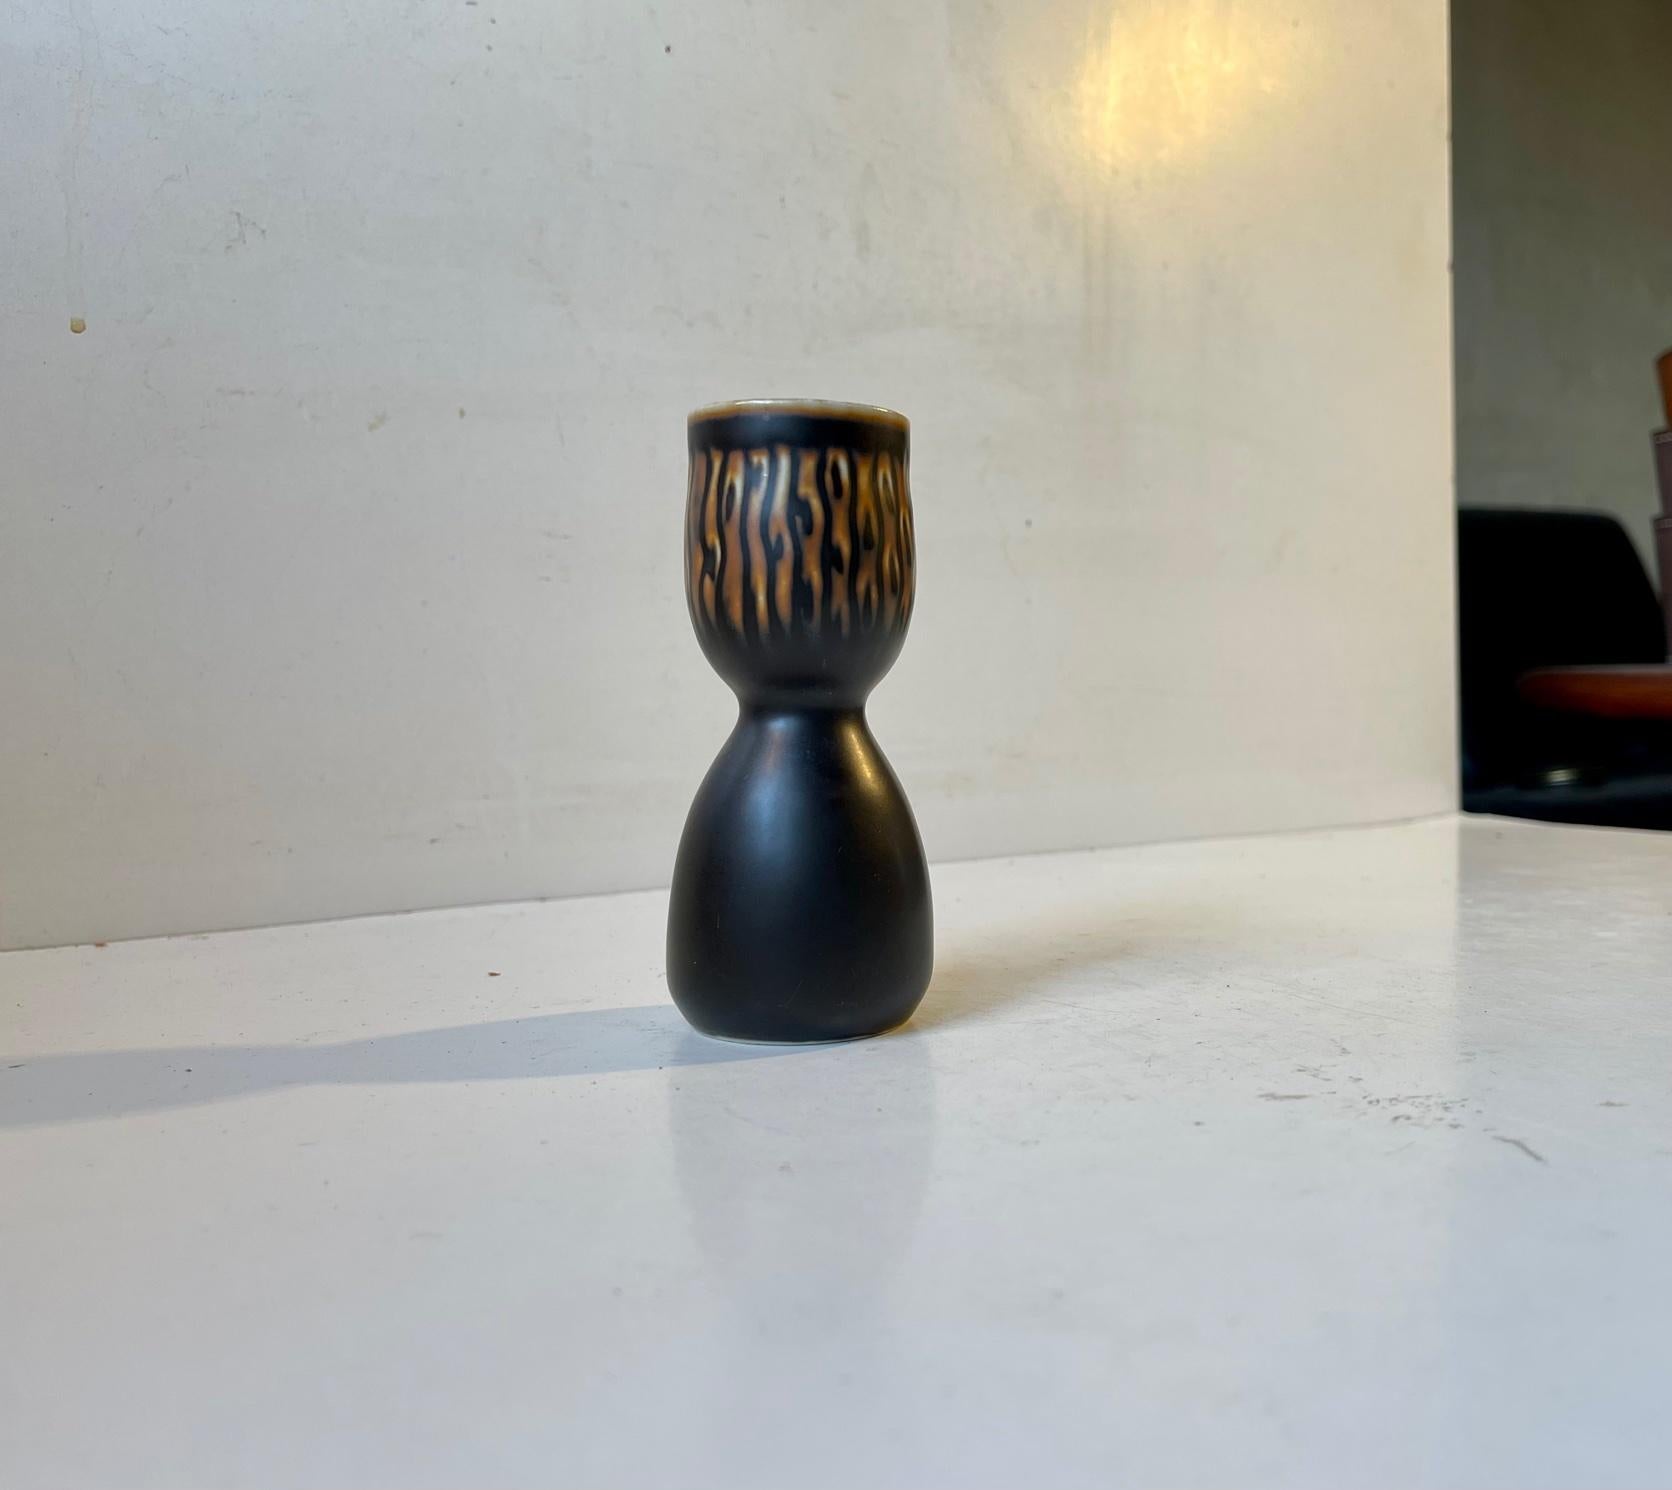 Axel Salto inspired piece from Royal Copenhagen. An hour glass shaped stoneware vase or candlestick designed by Gerd Bogelund during the 1950s or early 60s. Its decorated with a dark brown almost black main glaze and featuring abstract/floral